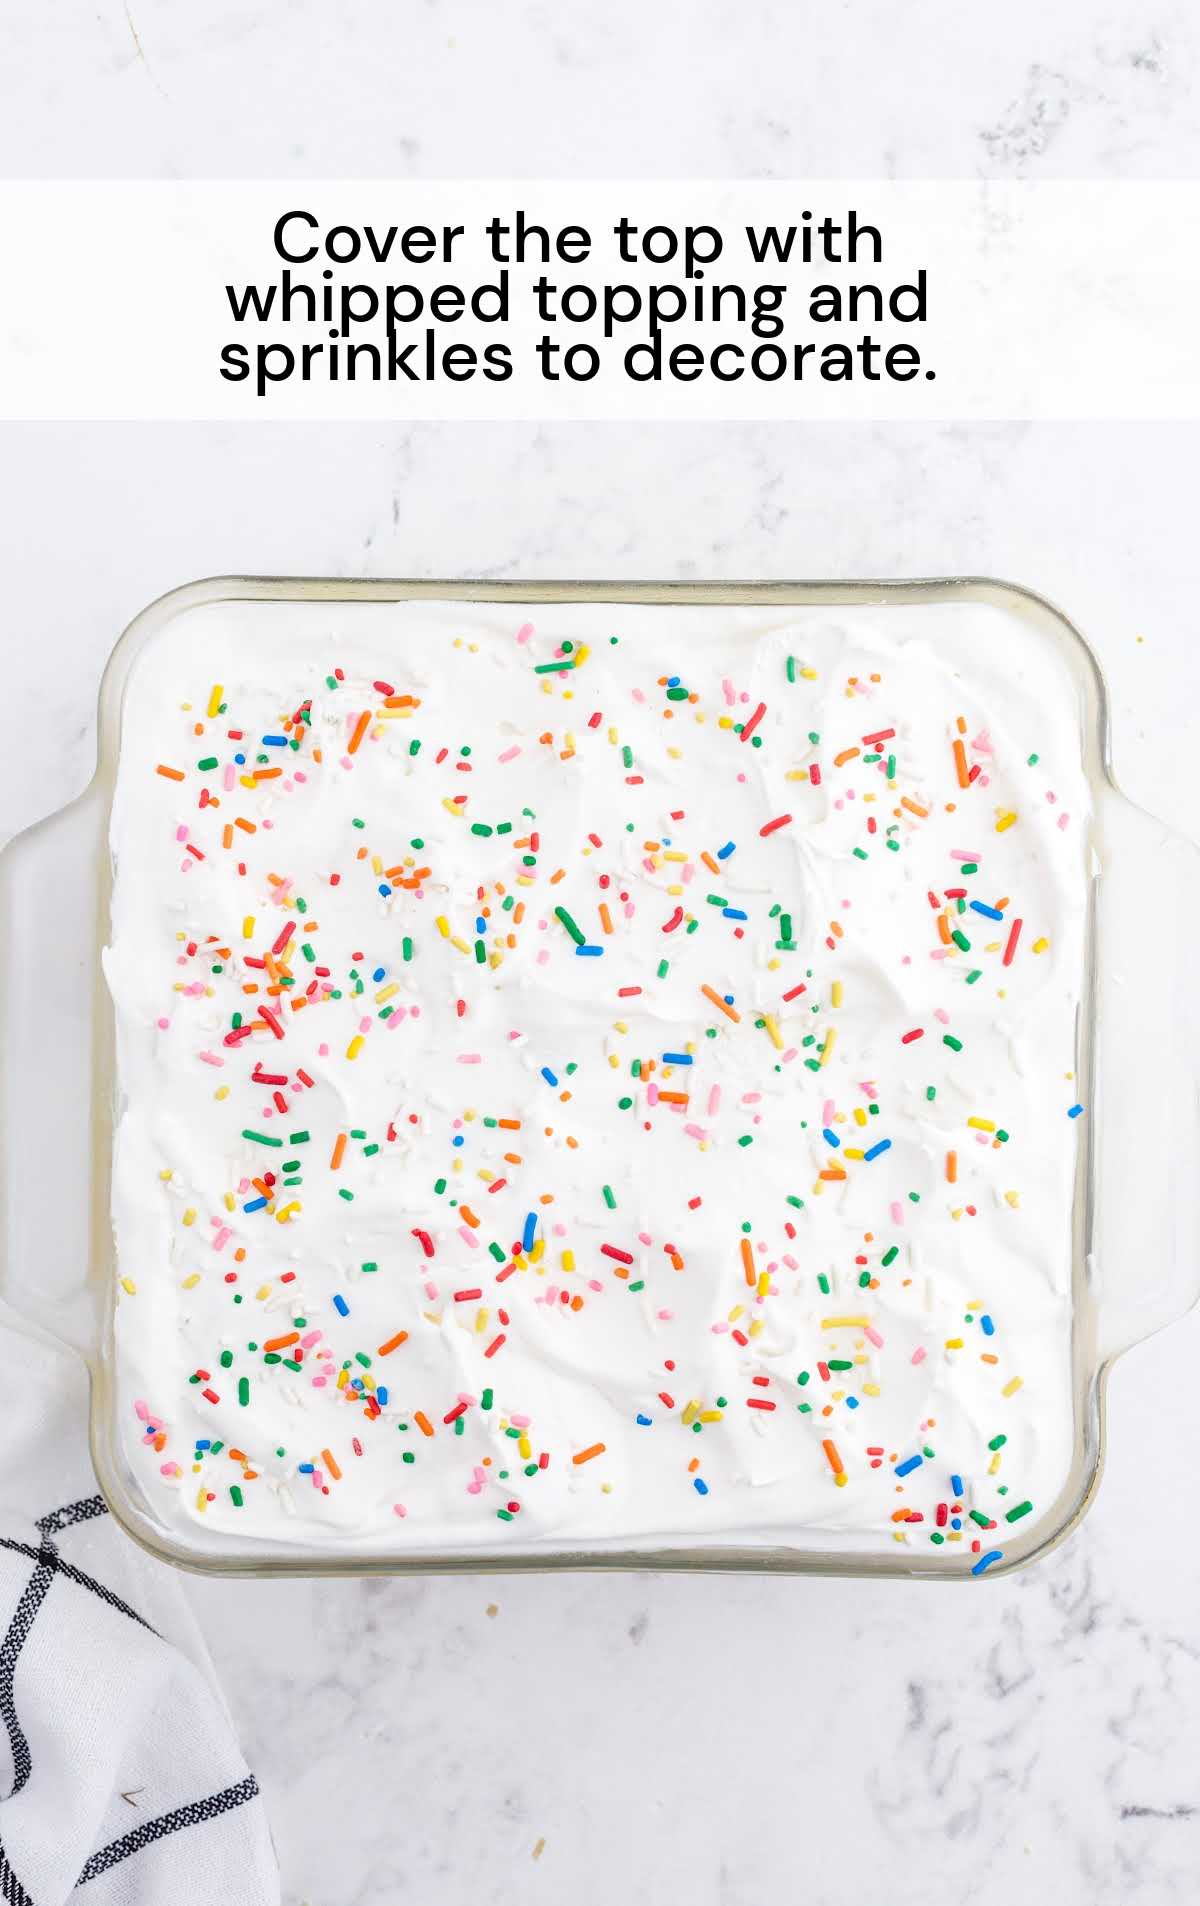 whipped topping and sprinkles places over the top if the cake in a baking dish